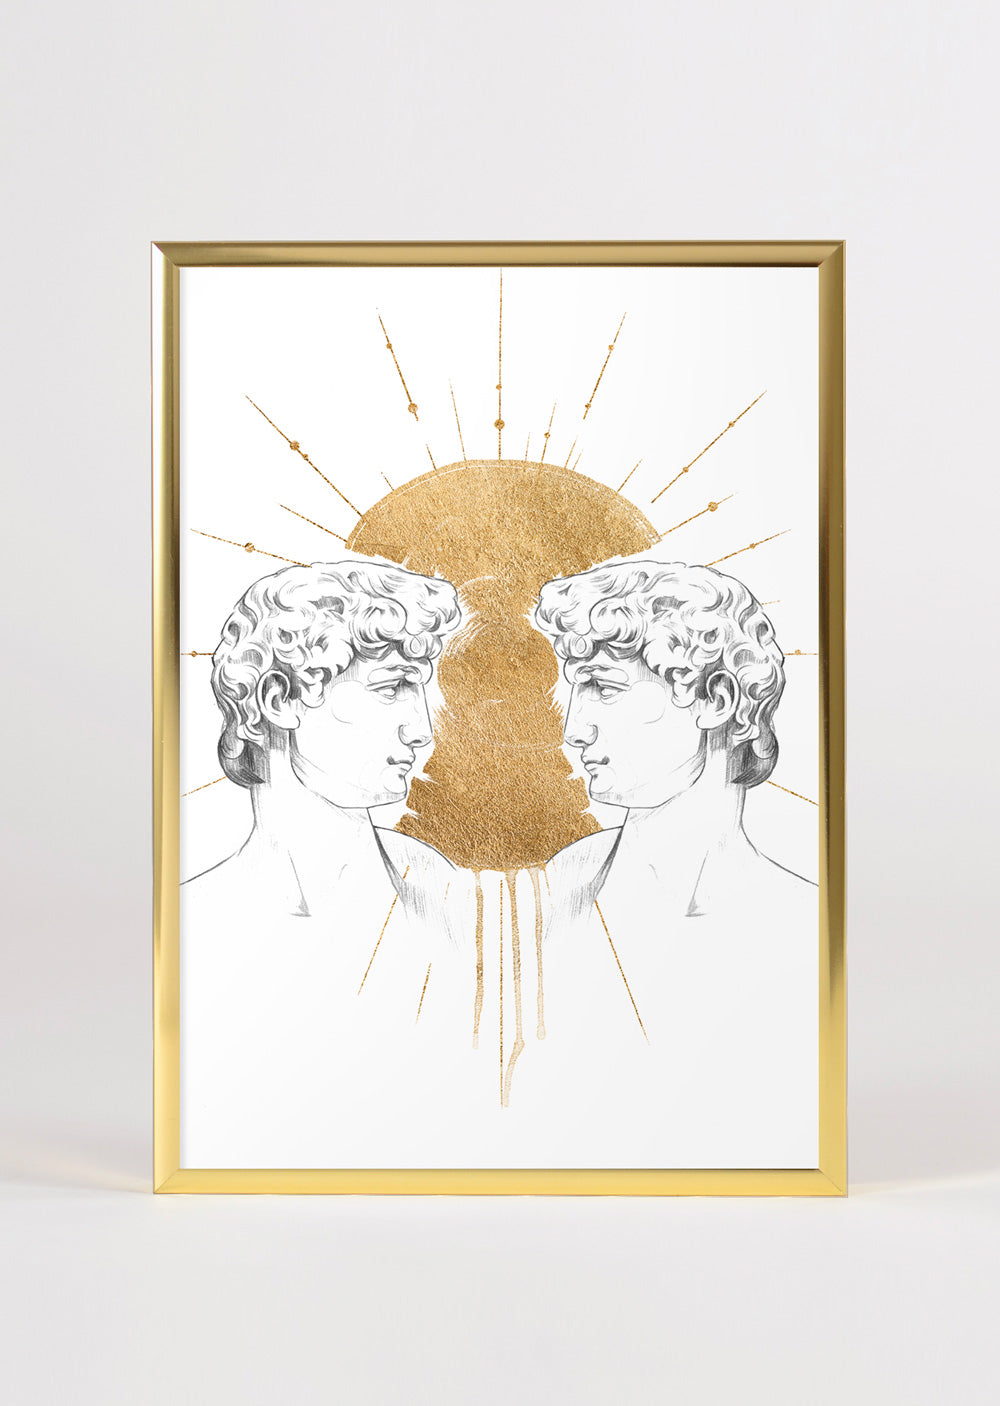 The Statue of David Michelangelo Renaissance Inspired Male Marble Bust Wall Art Print 'Narcissus'